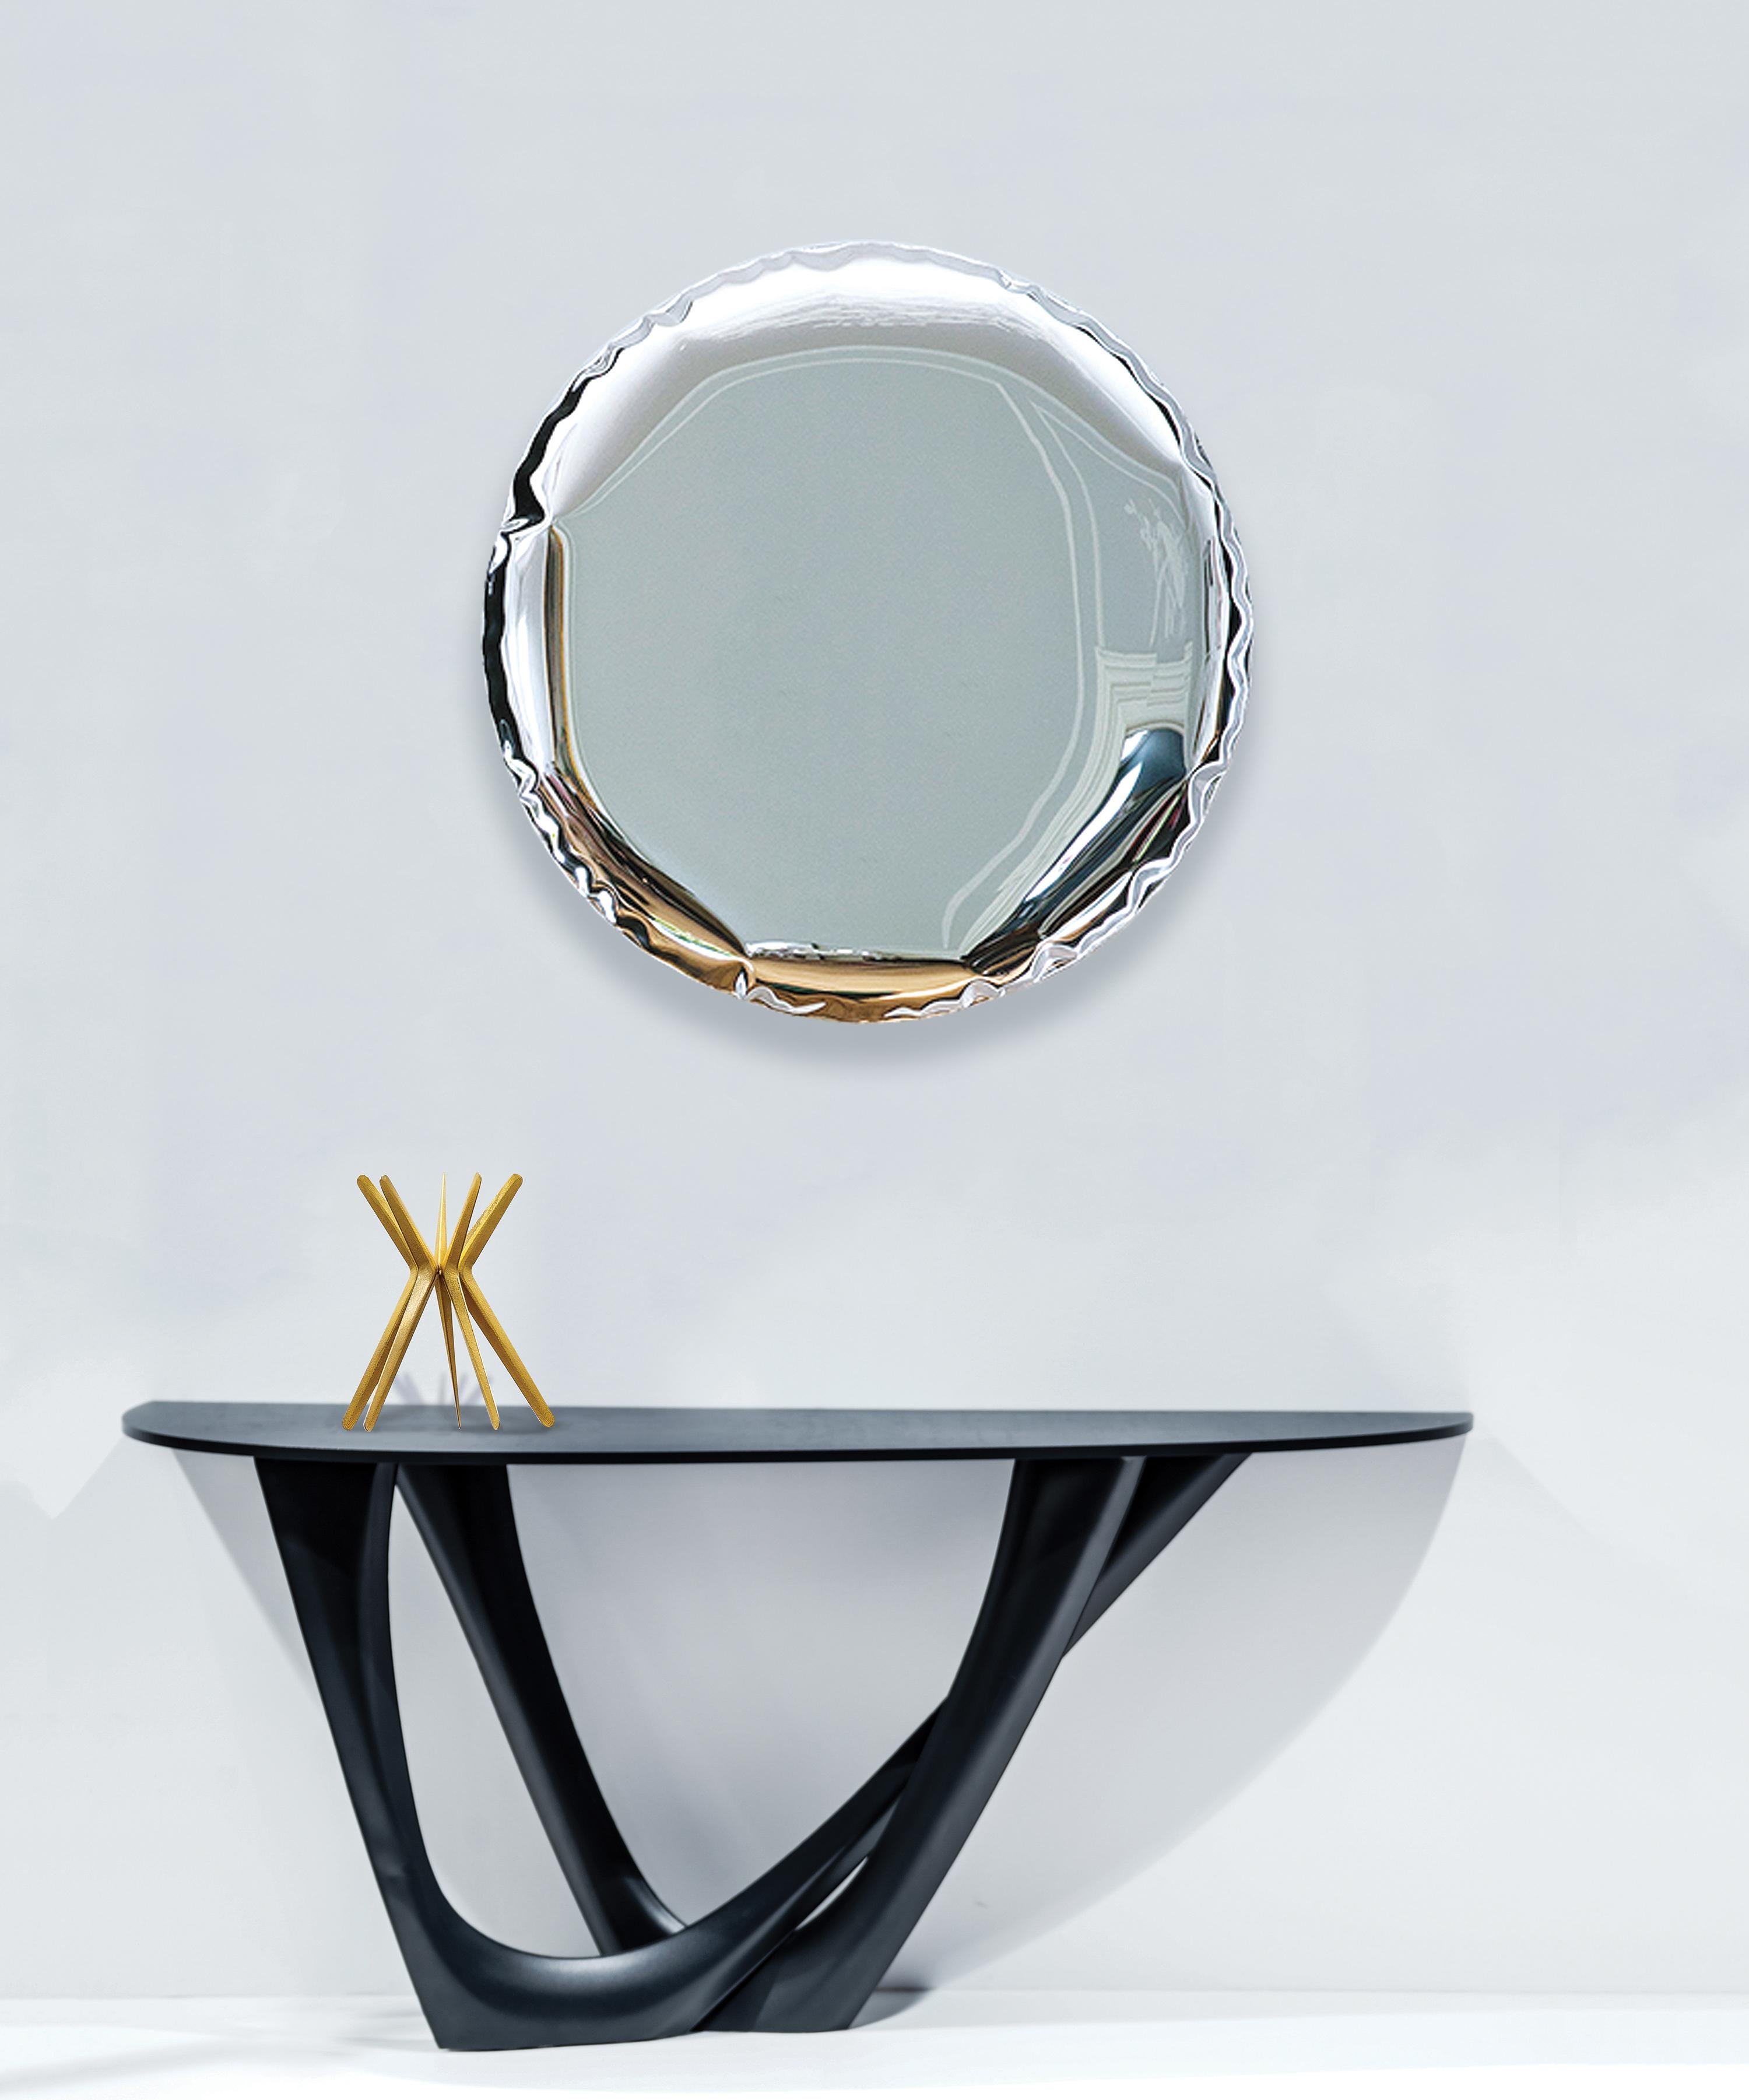 Helix Nebula Topaz Rhodonite Oko 150 Sculptural Wall Mirror by Zieta
Dimensions: ø 150 x D 6 cm. 
Material: Stainless steel. 
Finish: Helix Nebula Topaz Rhodonite transition. 

Available in different finishes. Also available in different sizes: ø75,